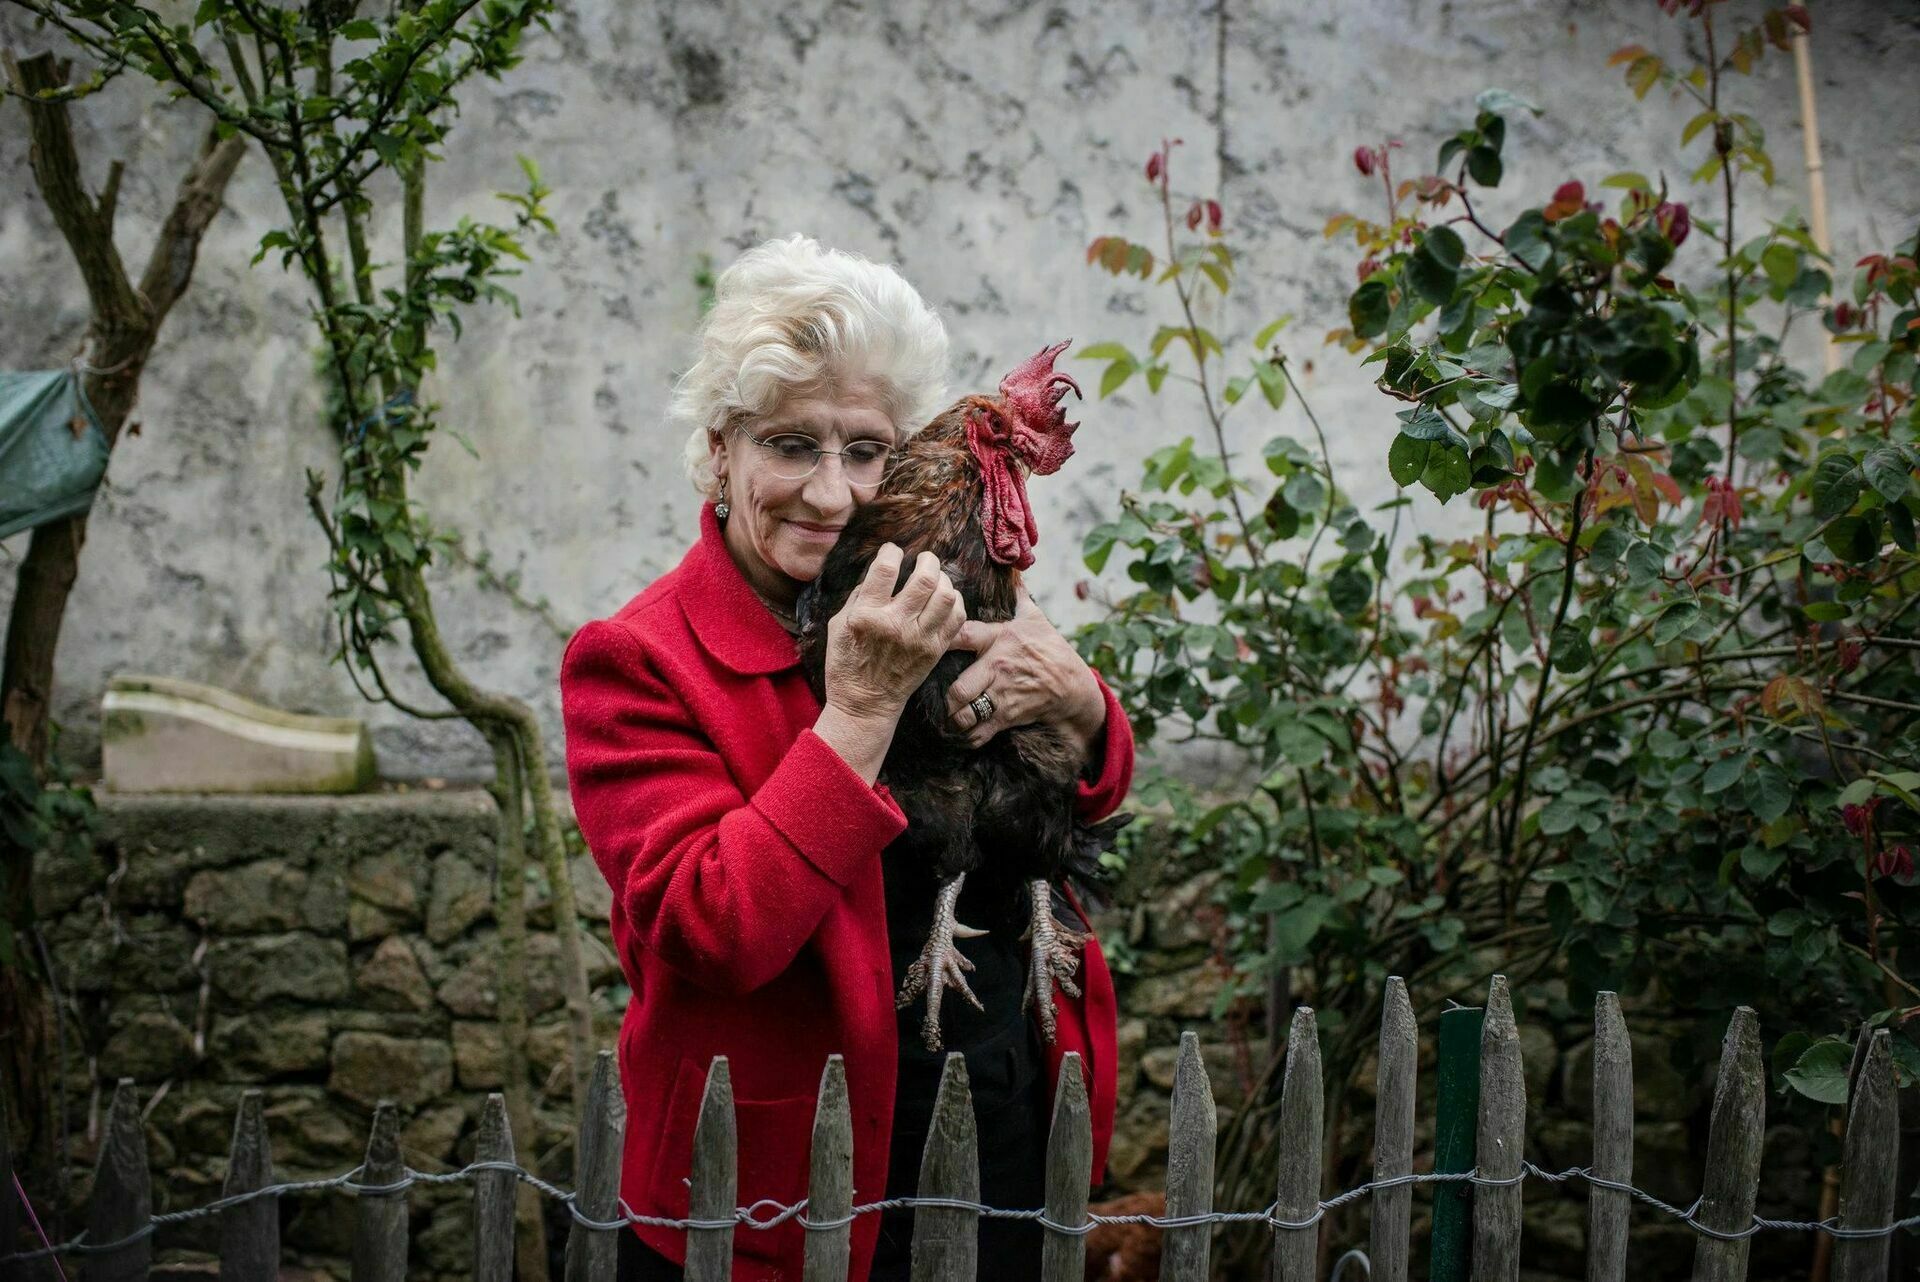 In France, the crowing of roosters and the smell of manure will be protected by a special law